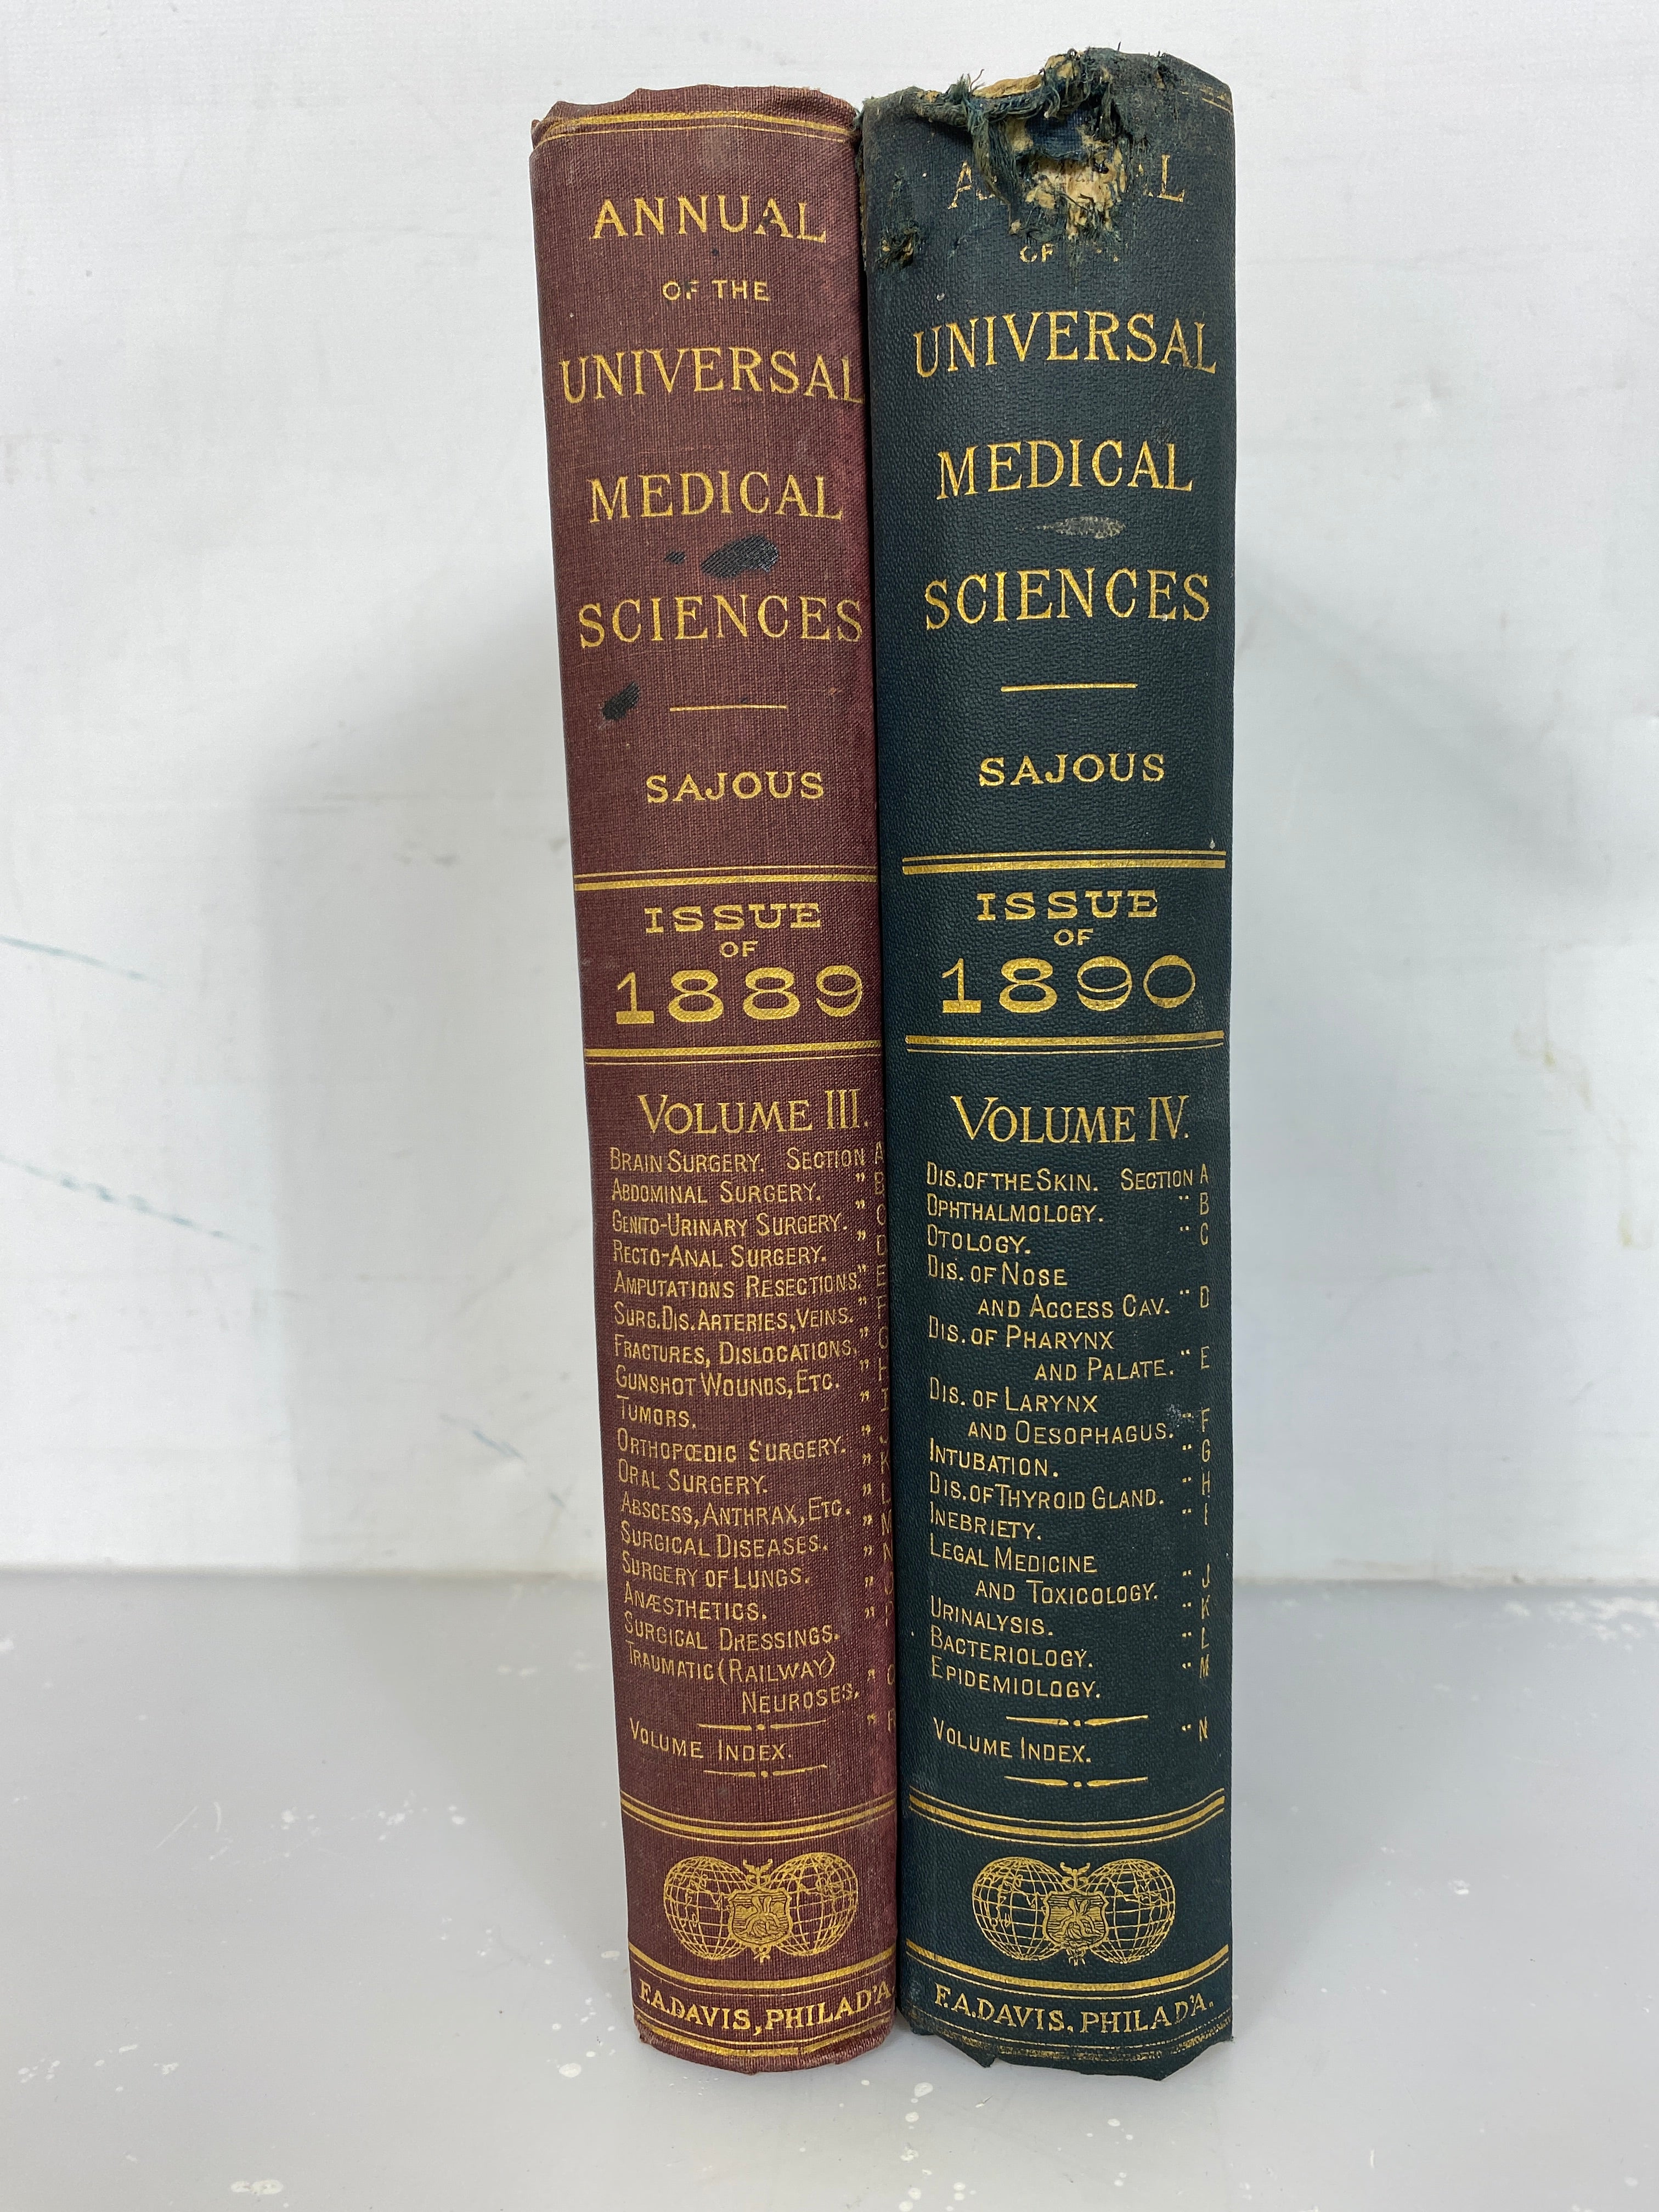 Lot of 2 Annual of the Universal Medical Sciences 1889 Volume III and 1890 Volume IV HC